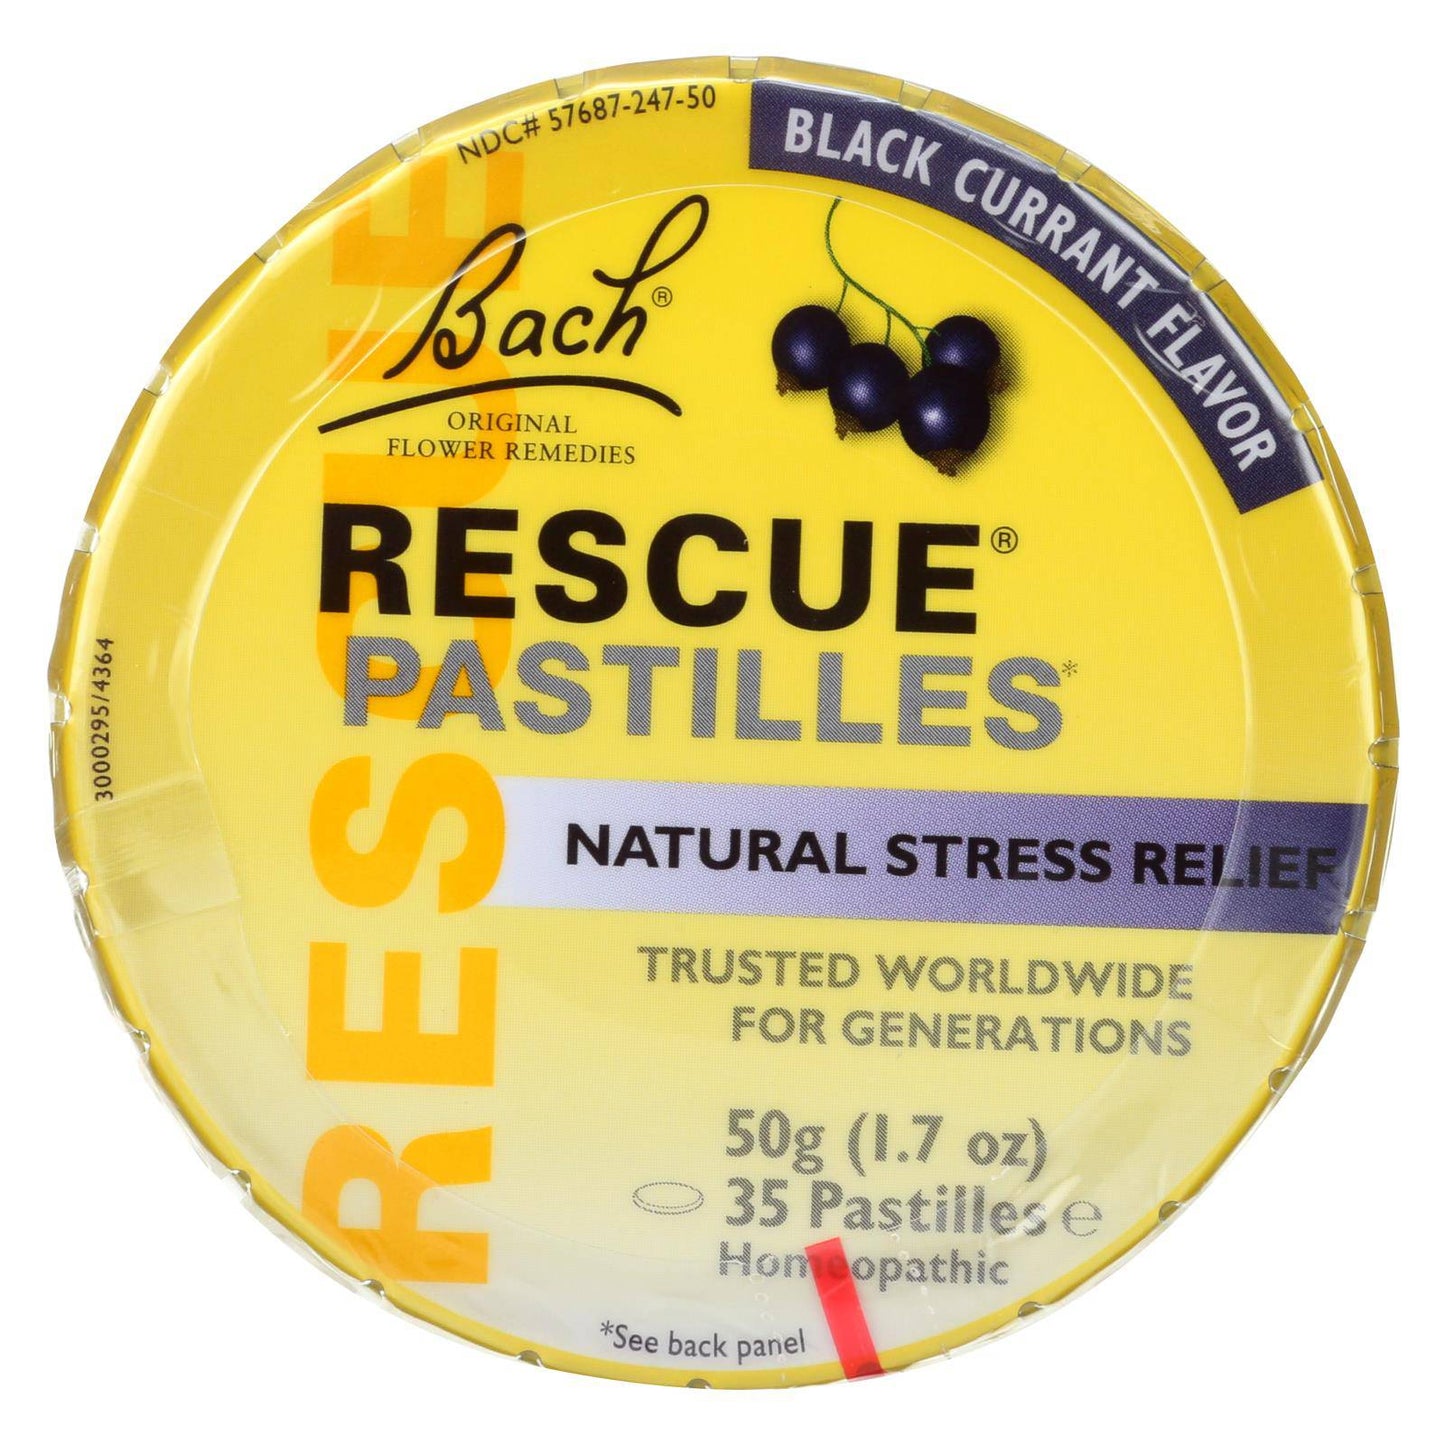 Buy Bach Flower Remedies Rescue Pastilles Black Currant - 1.7 Oz - Case Of 12  at OnlyNaturals.us